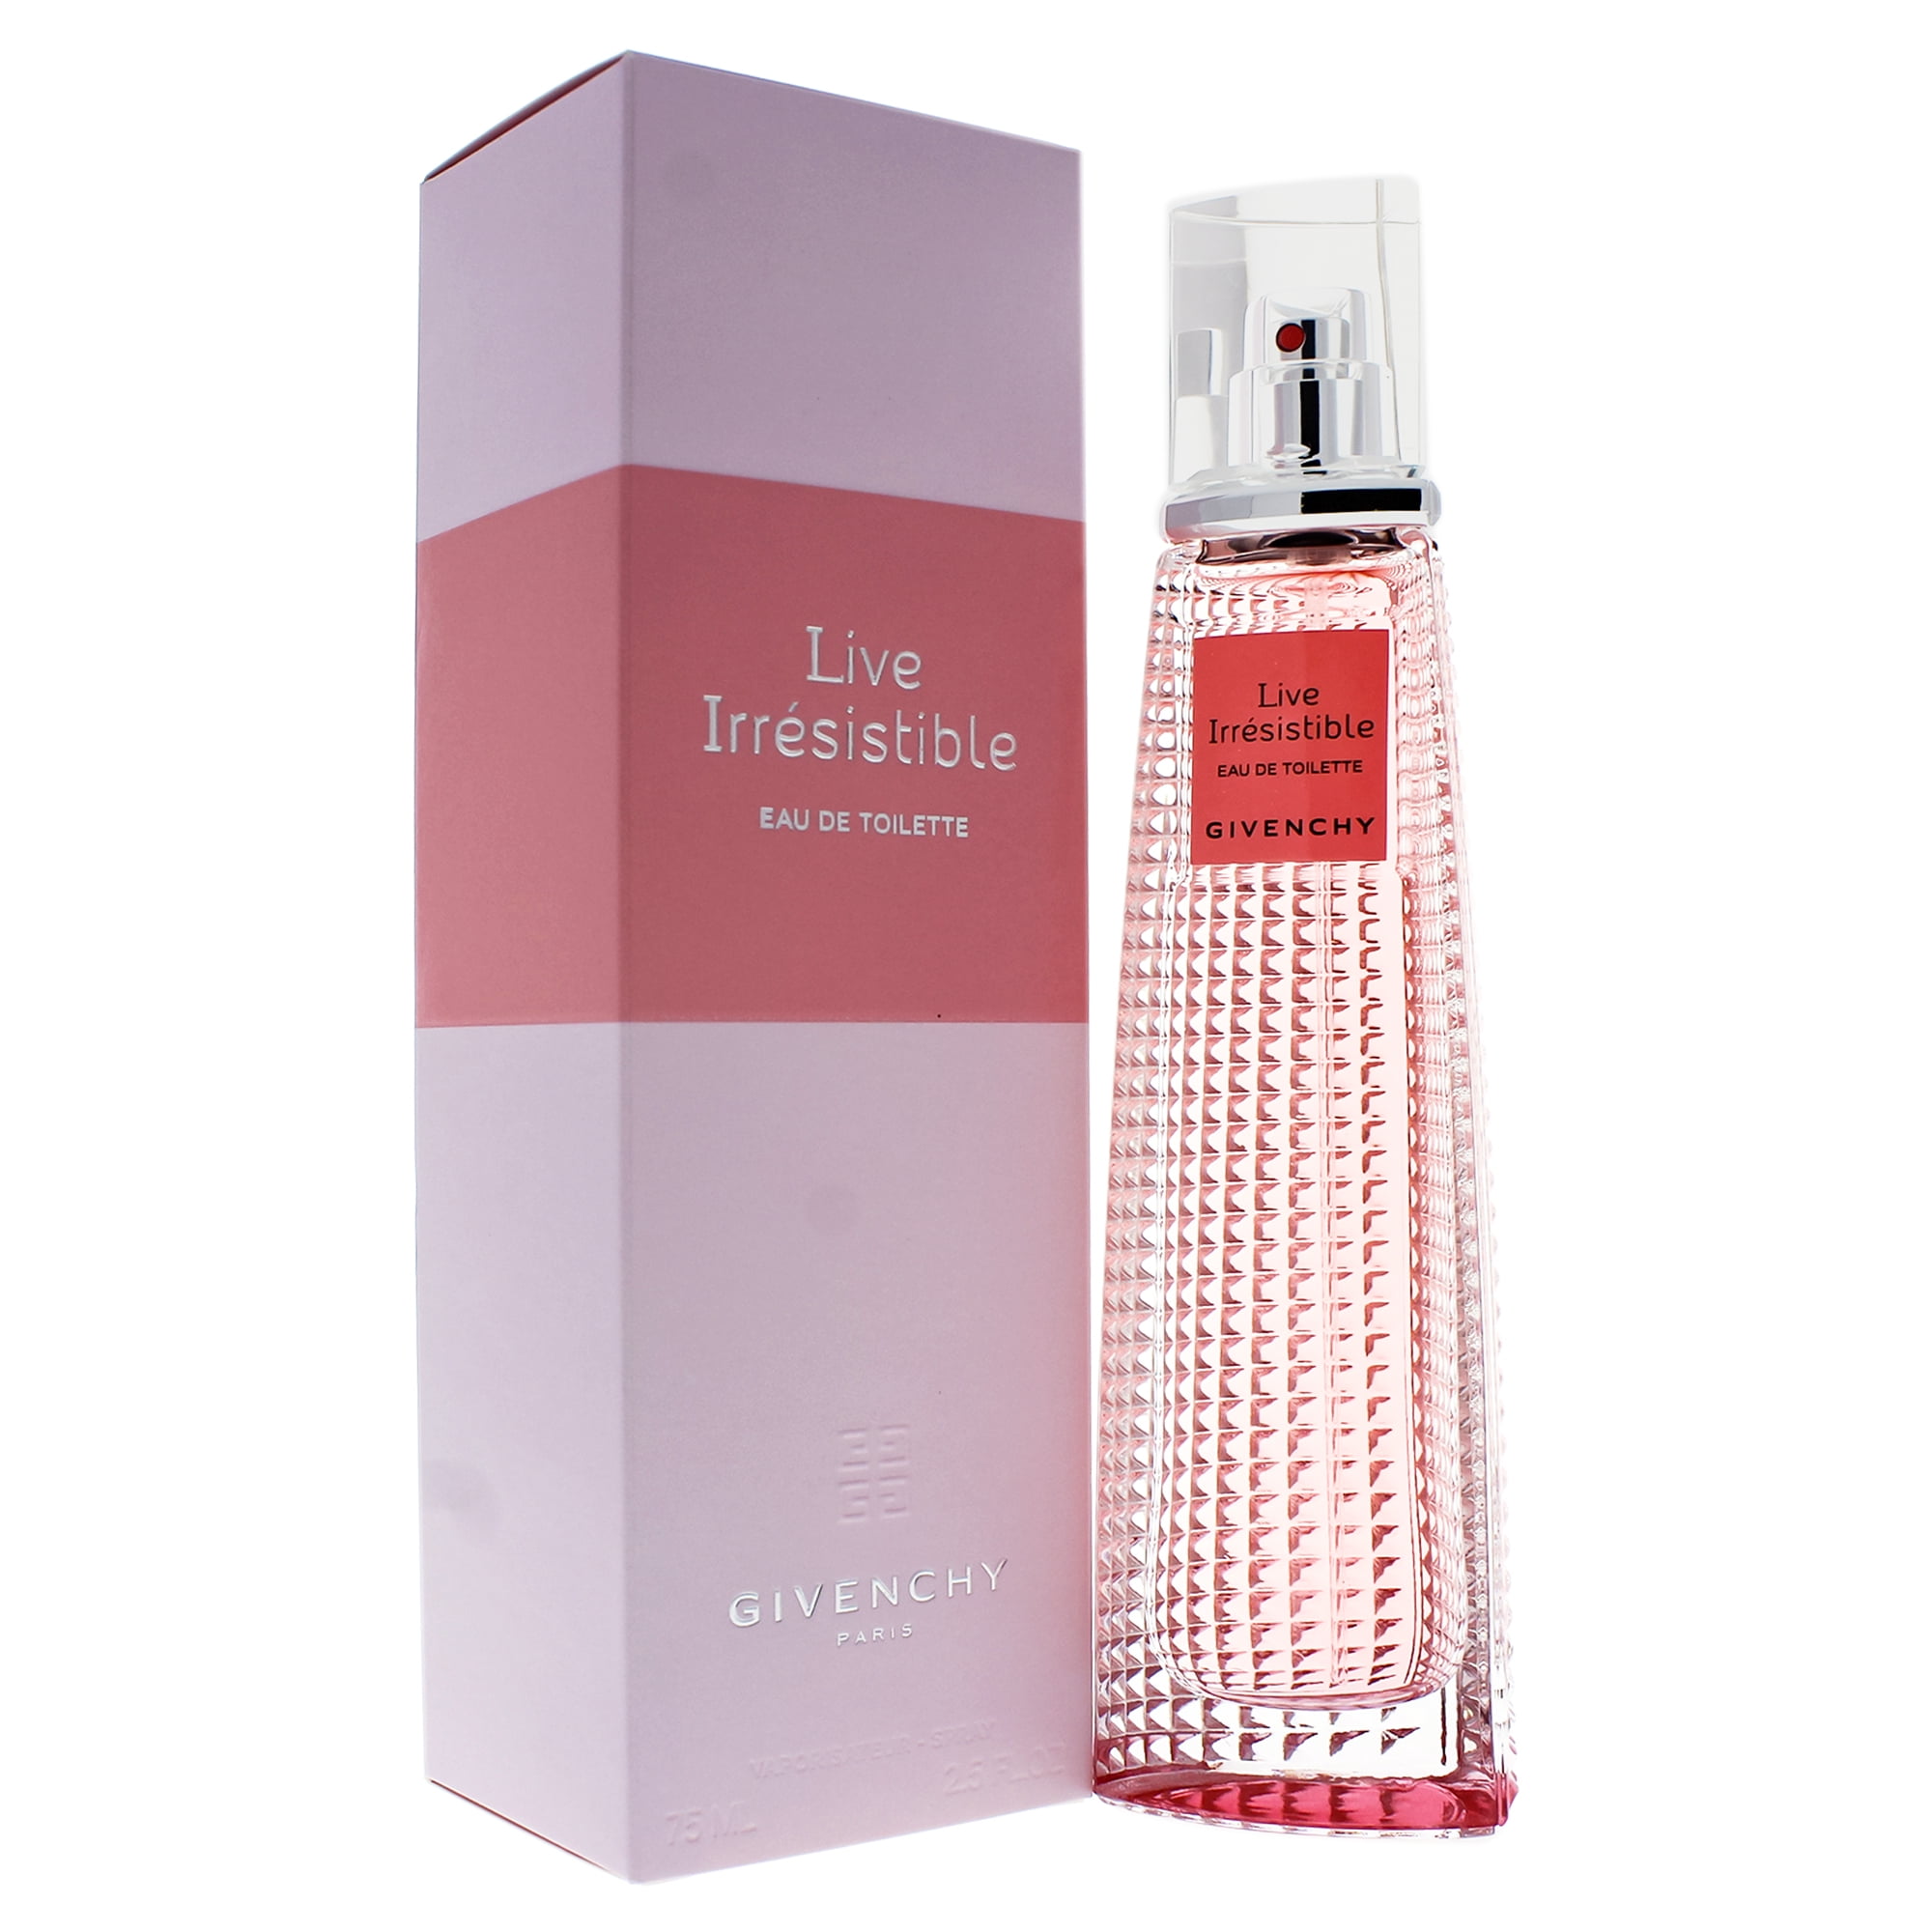 Givenchy irresistible toilette. Givenchy Live irresistible Eau de Toilette. Духи Givenchy Live irresistible. Givenchy very irresistible EDT. Givenchy Eau de Toilette женские irresistible.